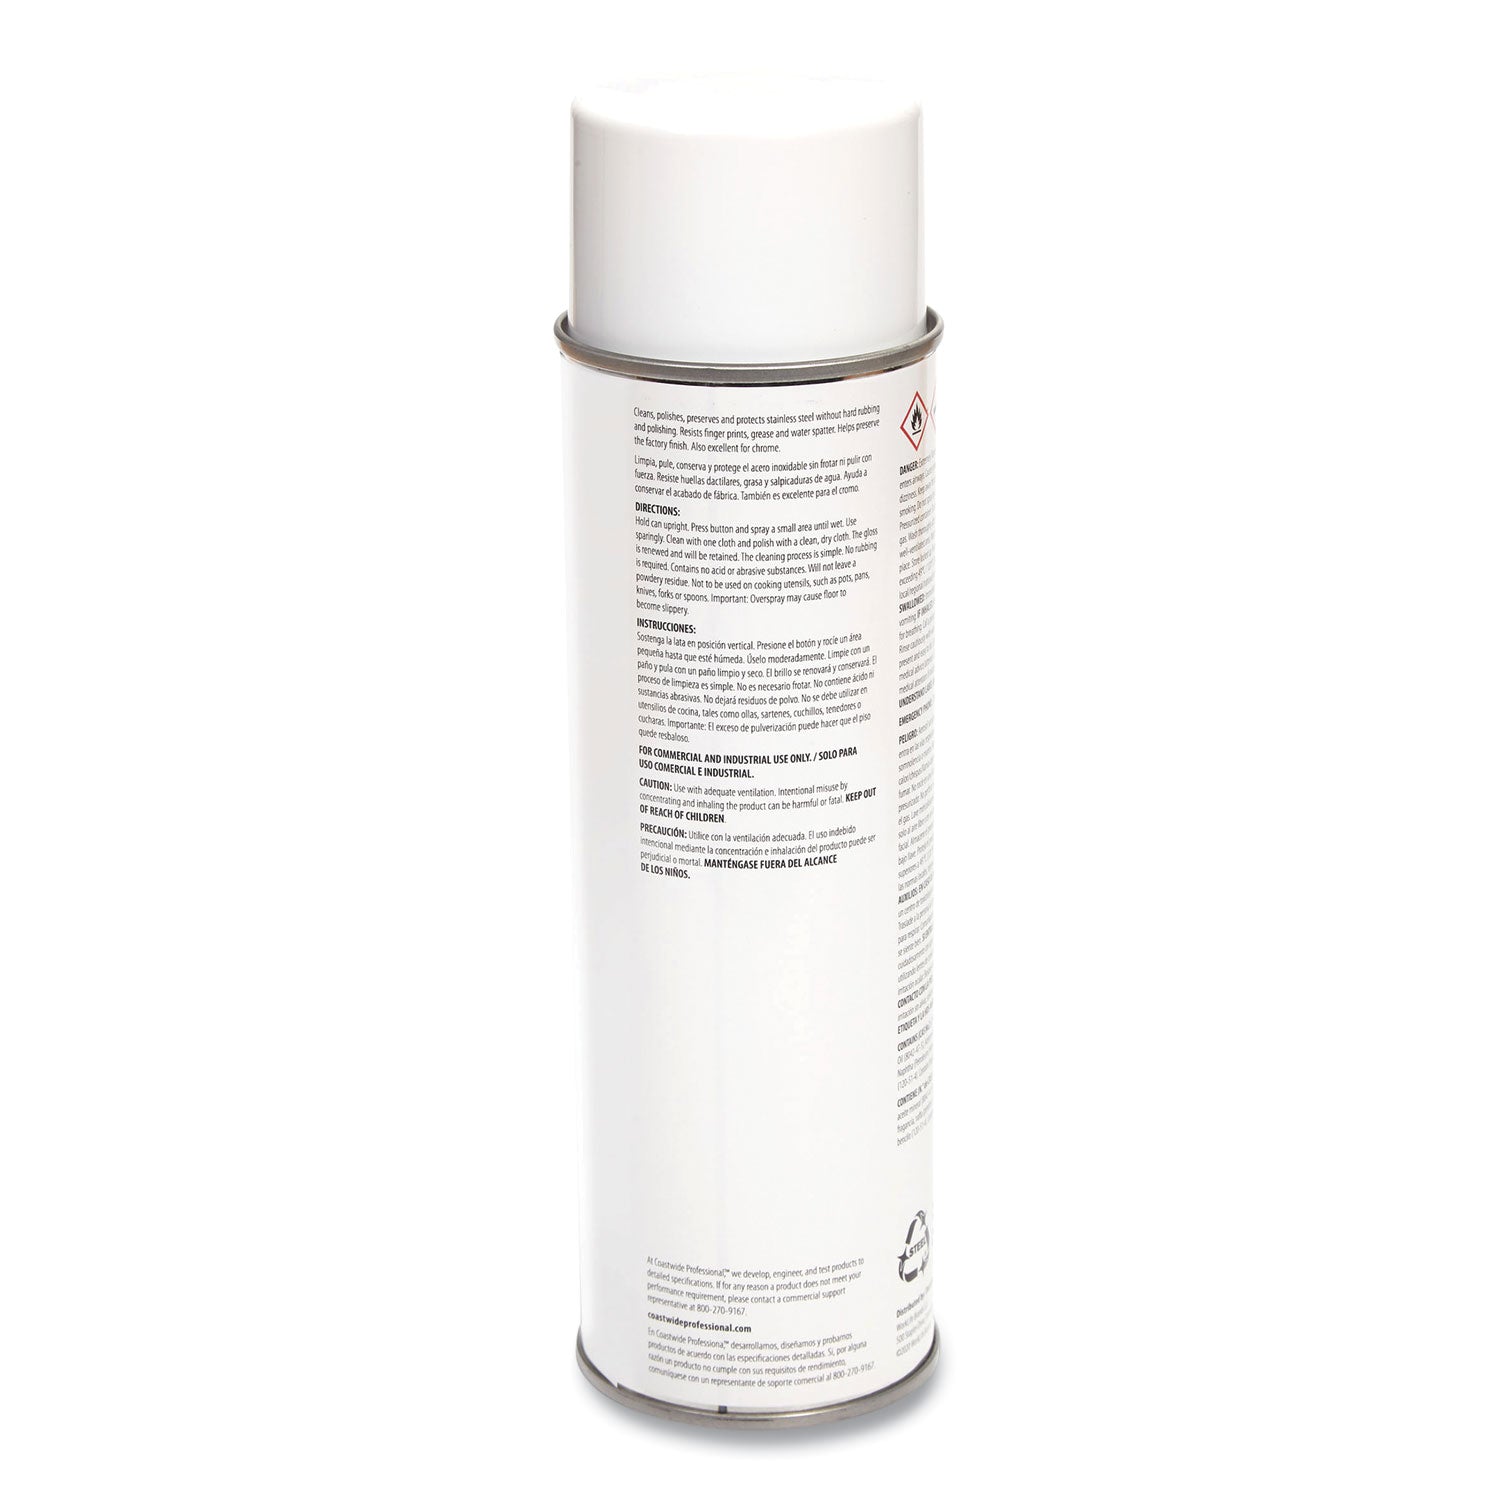 stainless-steel-cleaner-and-polish-lemon-scent-15-oz-aerosol-spray-6-carton_cwz58497a50879 - 3